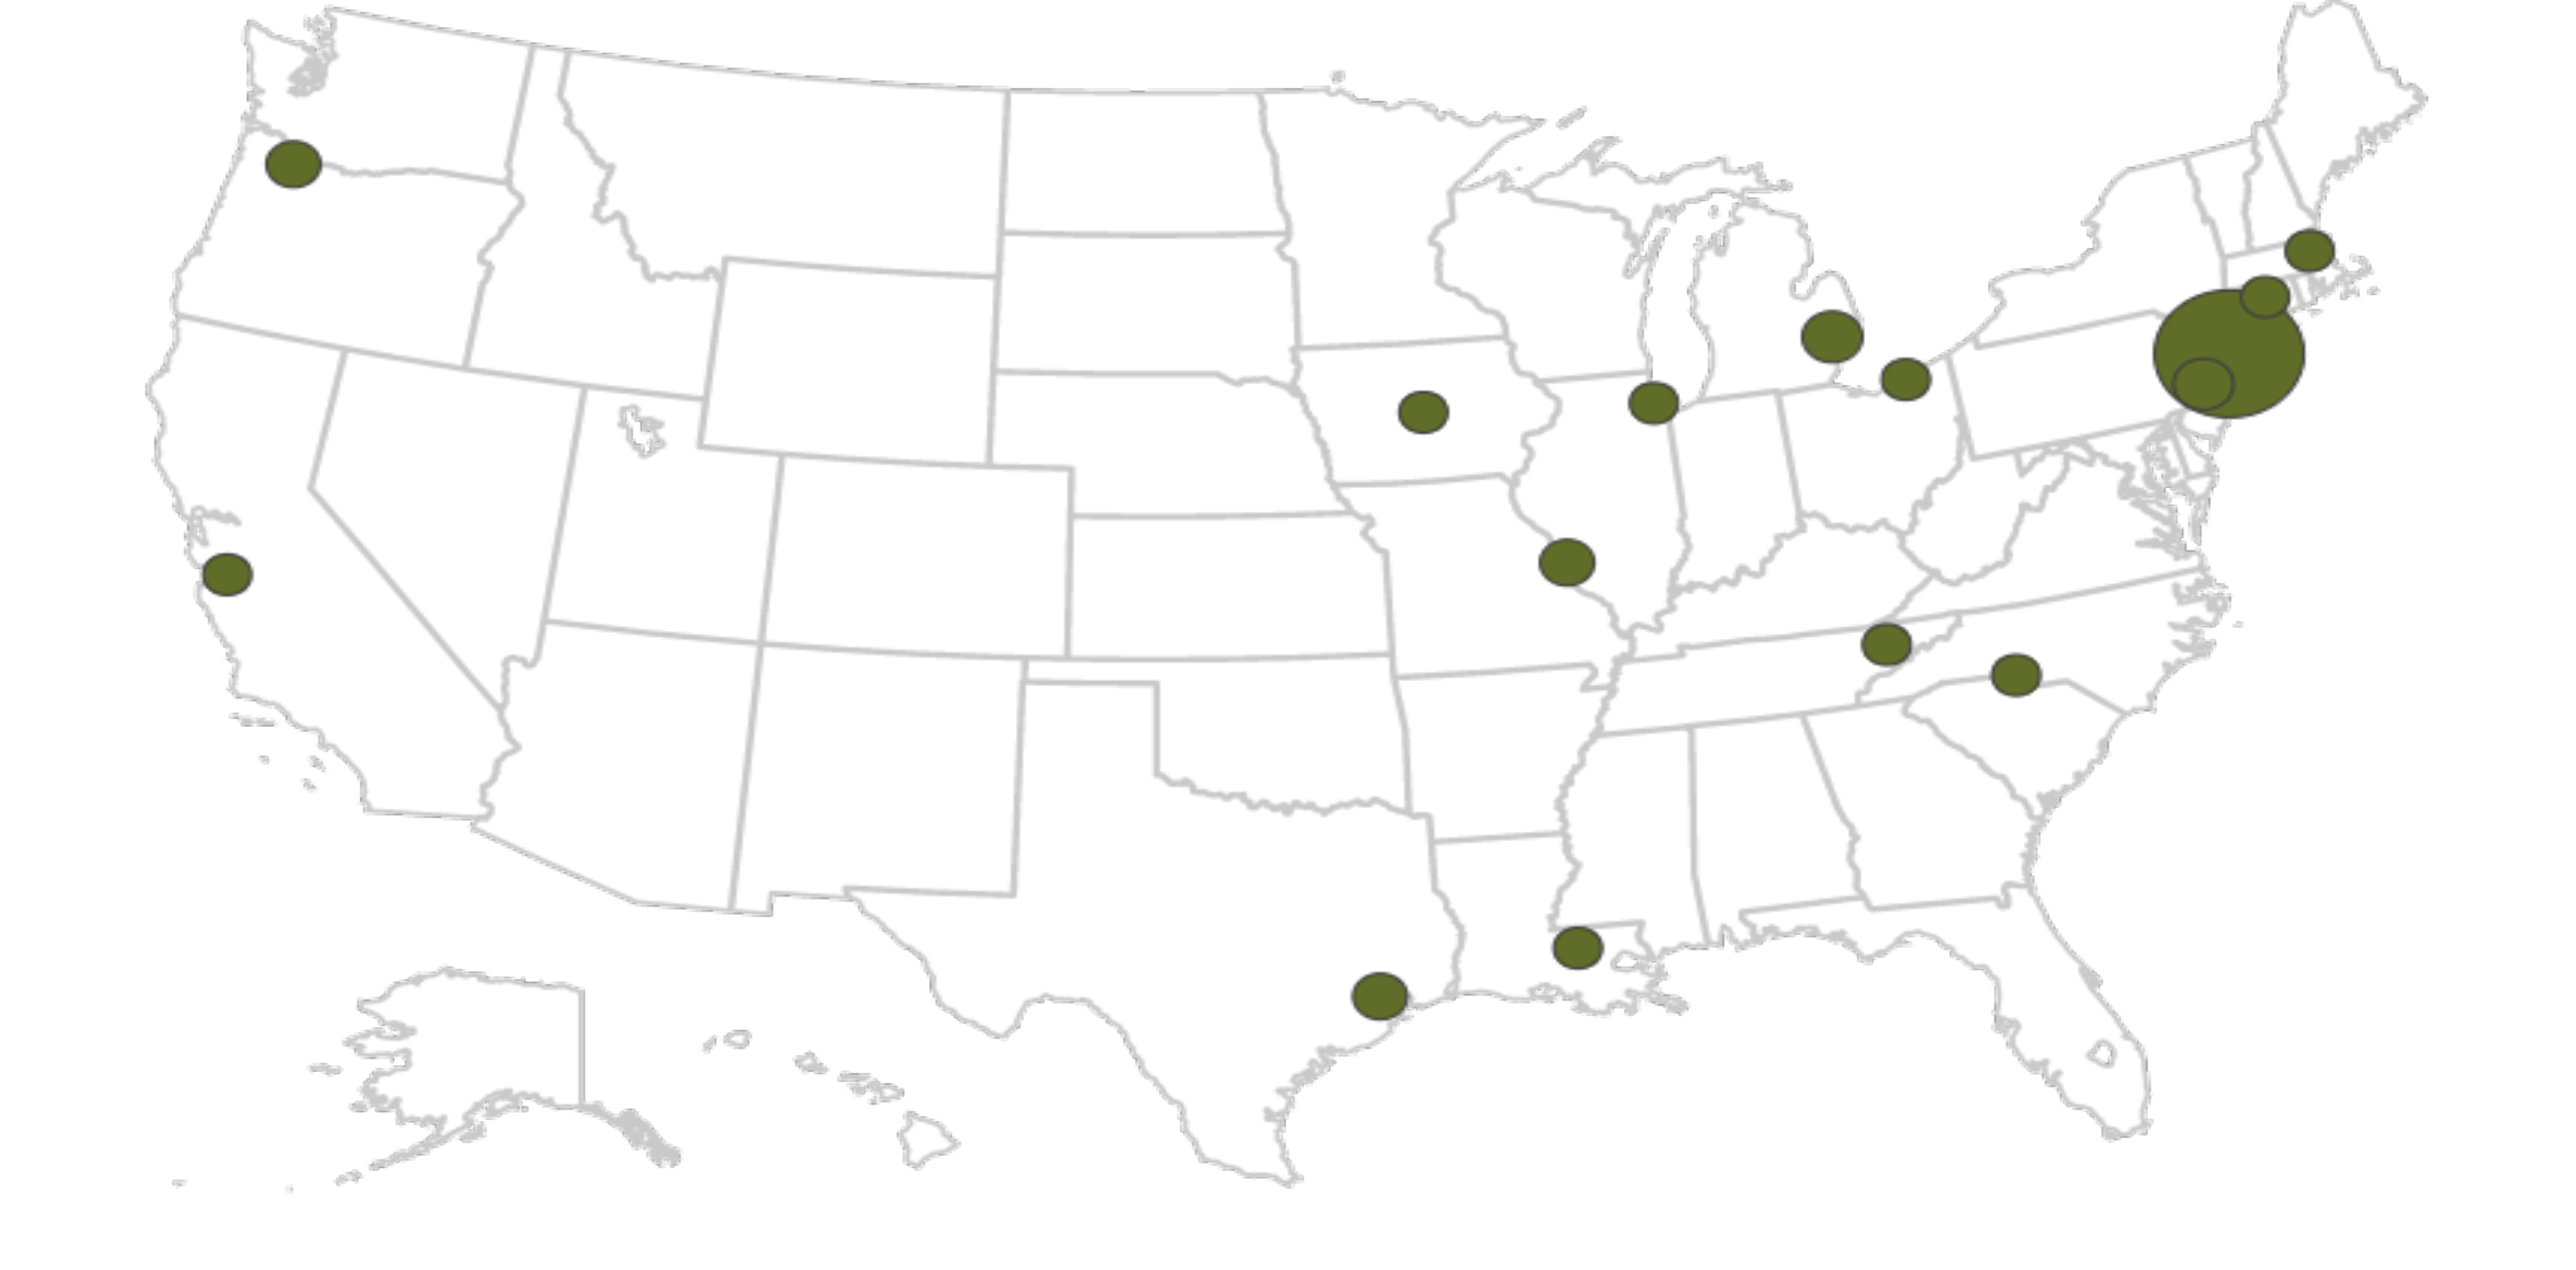 distribution map (United States) of cosmetic chemist jobs